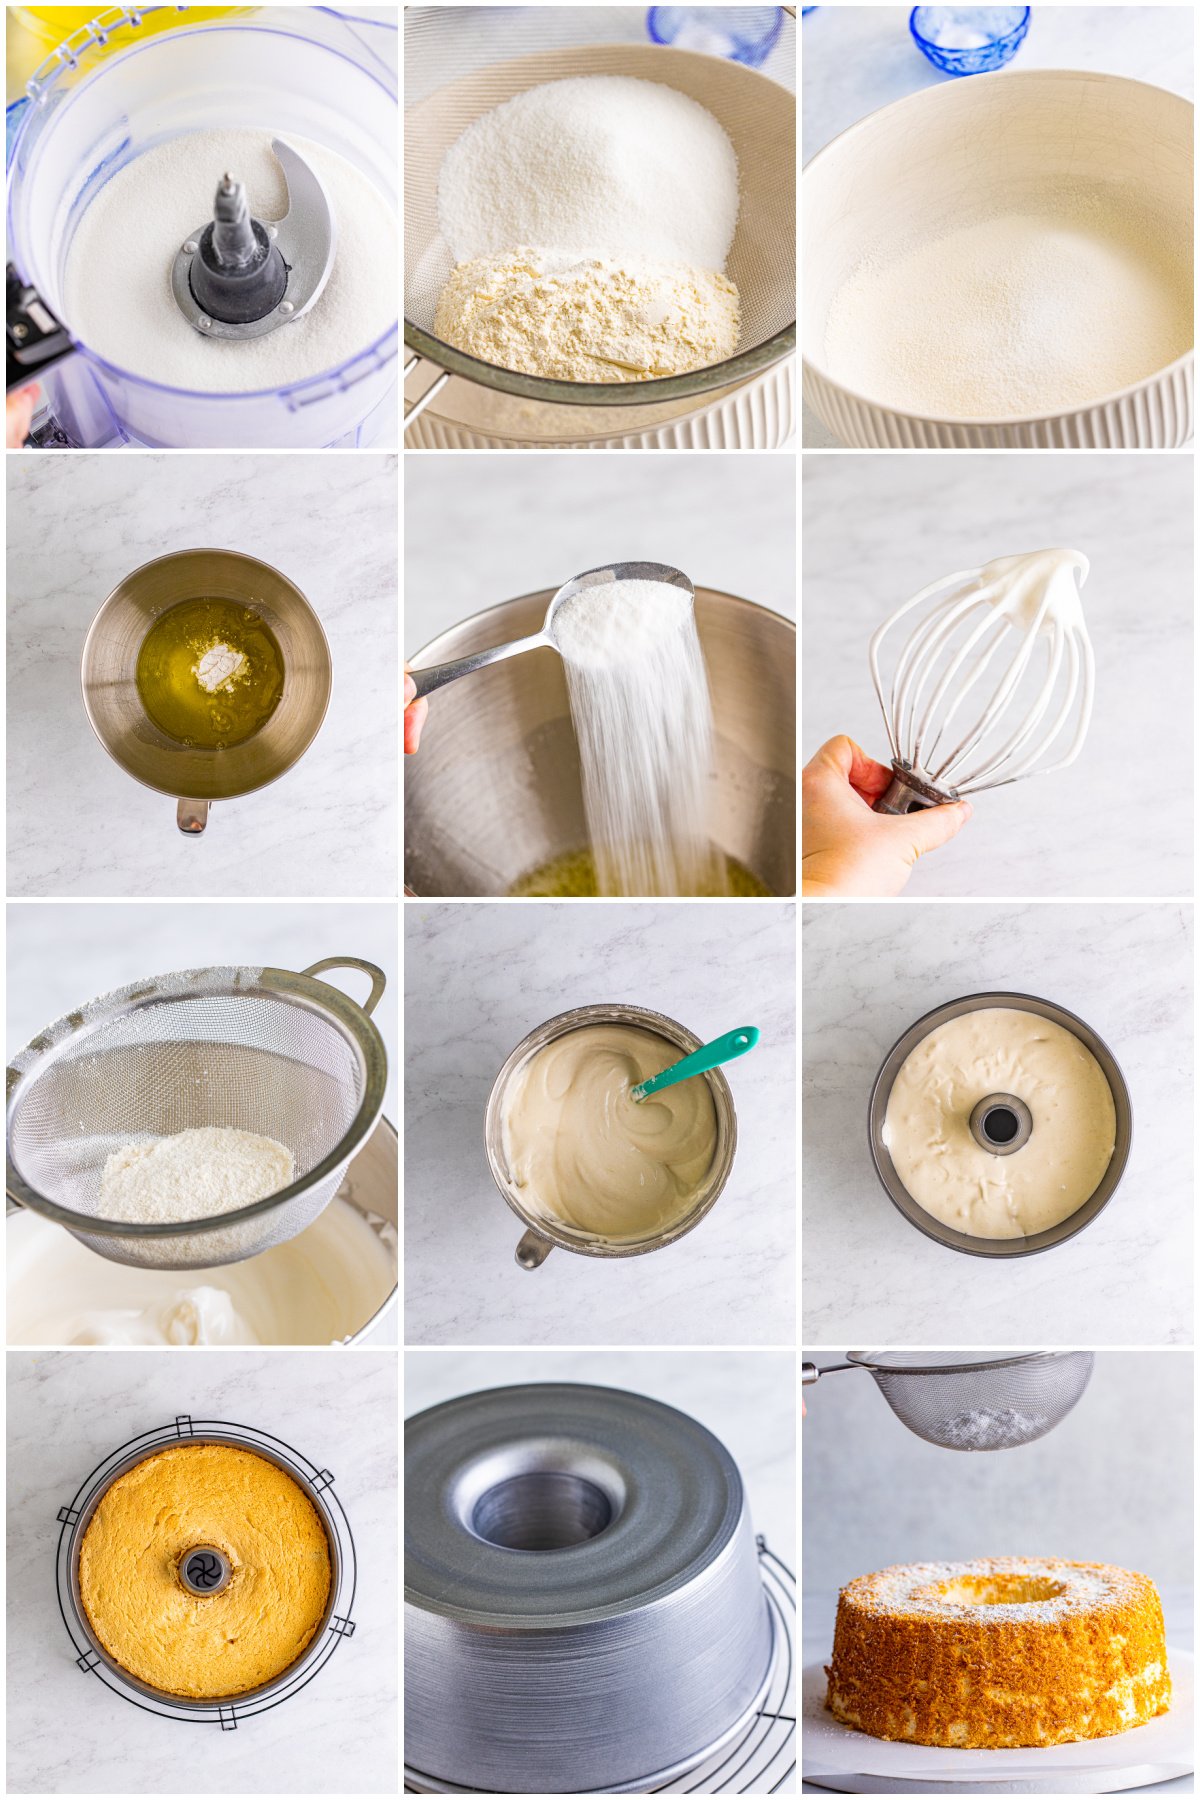 Step by step photos on how to make an Angel Food Cake Recipe.